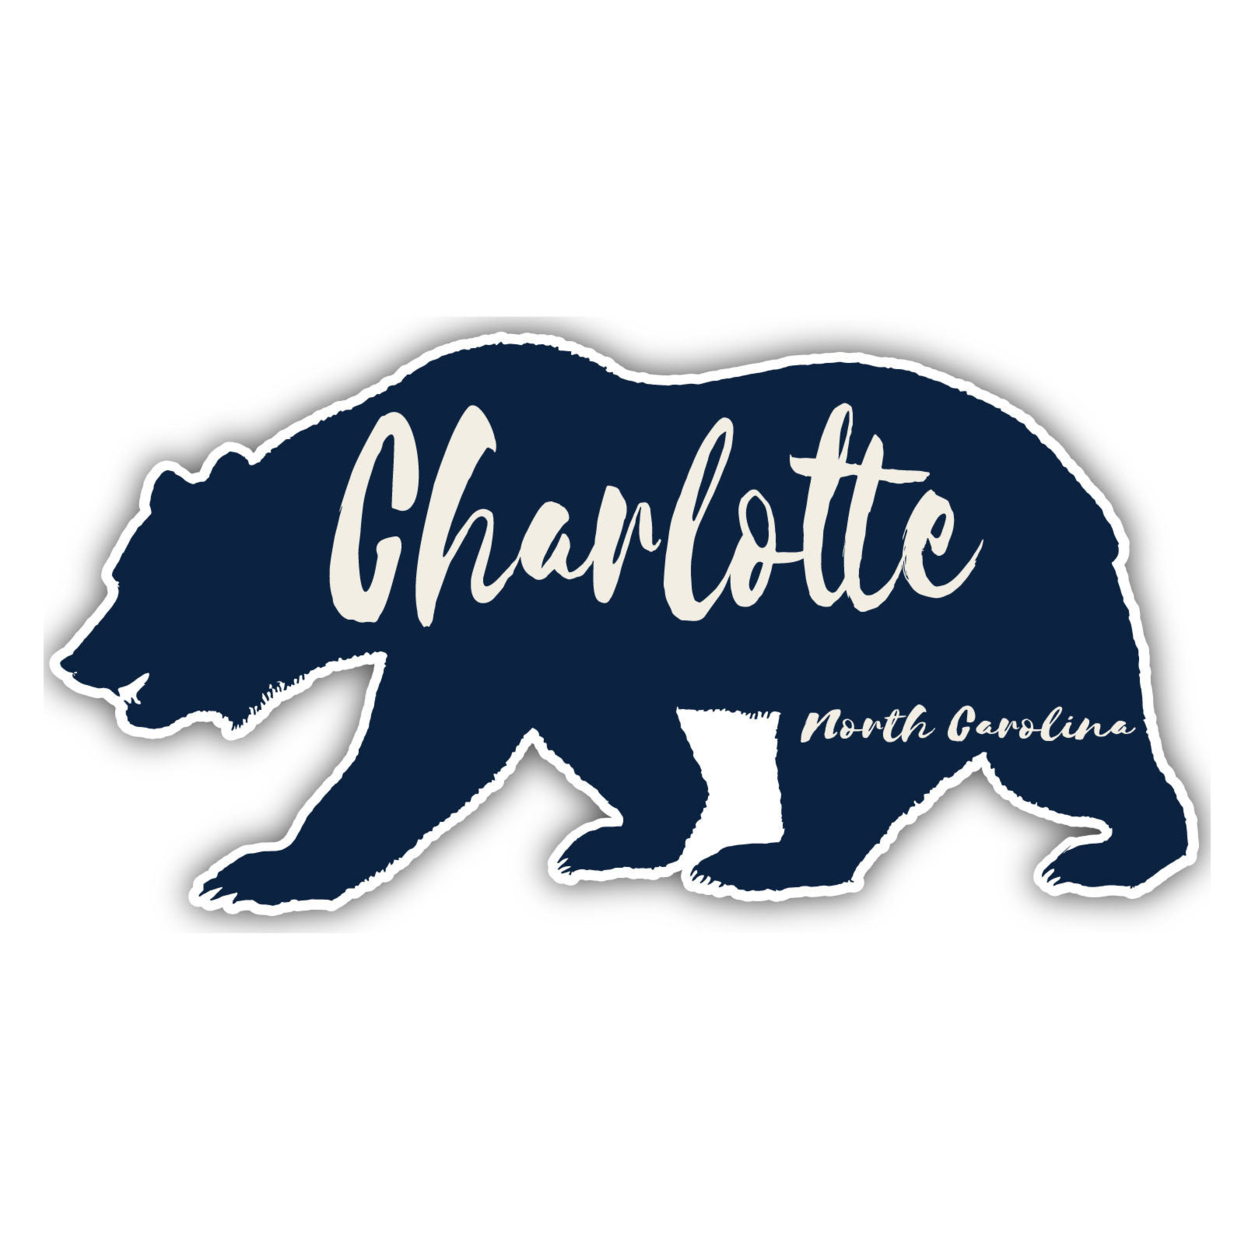 Charlotte North Carolina Souvenir Decorative Stickers (Choose Theme And Size) - 4-Pack, 12-Inch, Great Outdoors